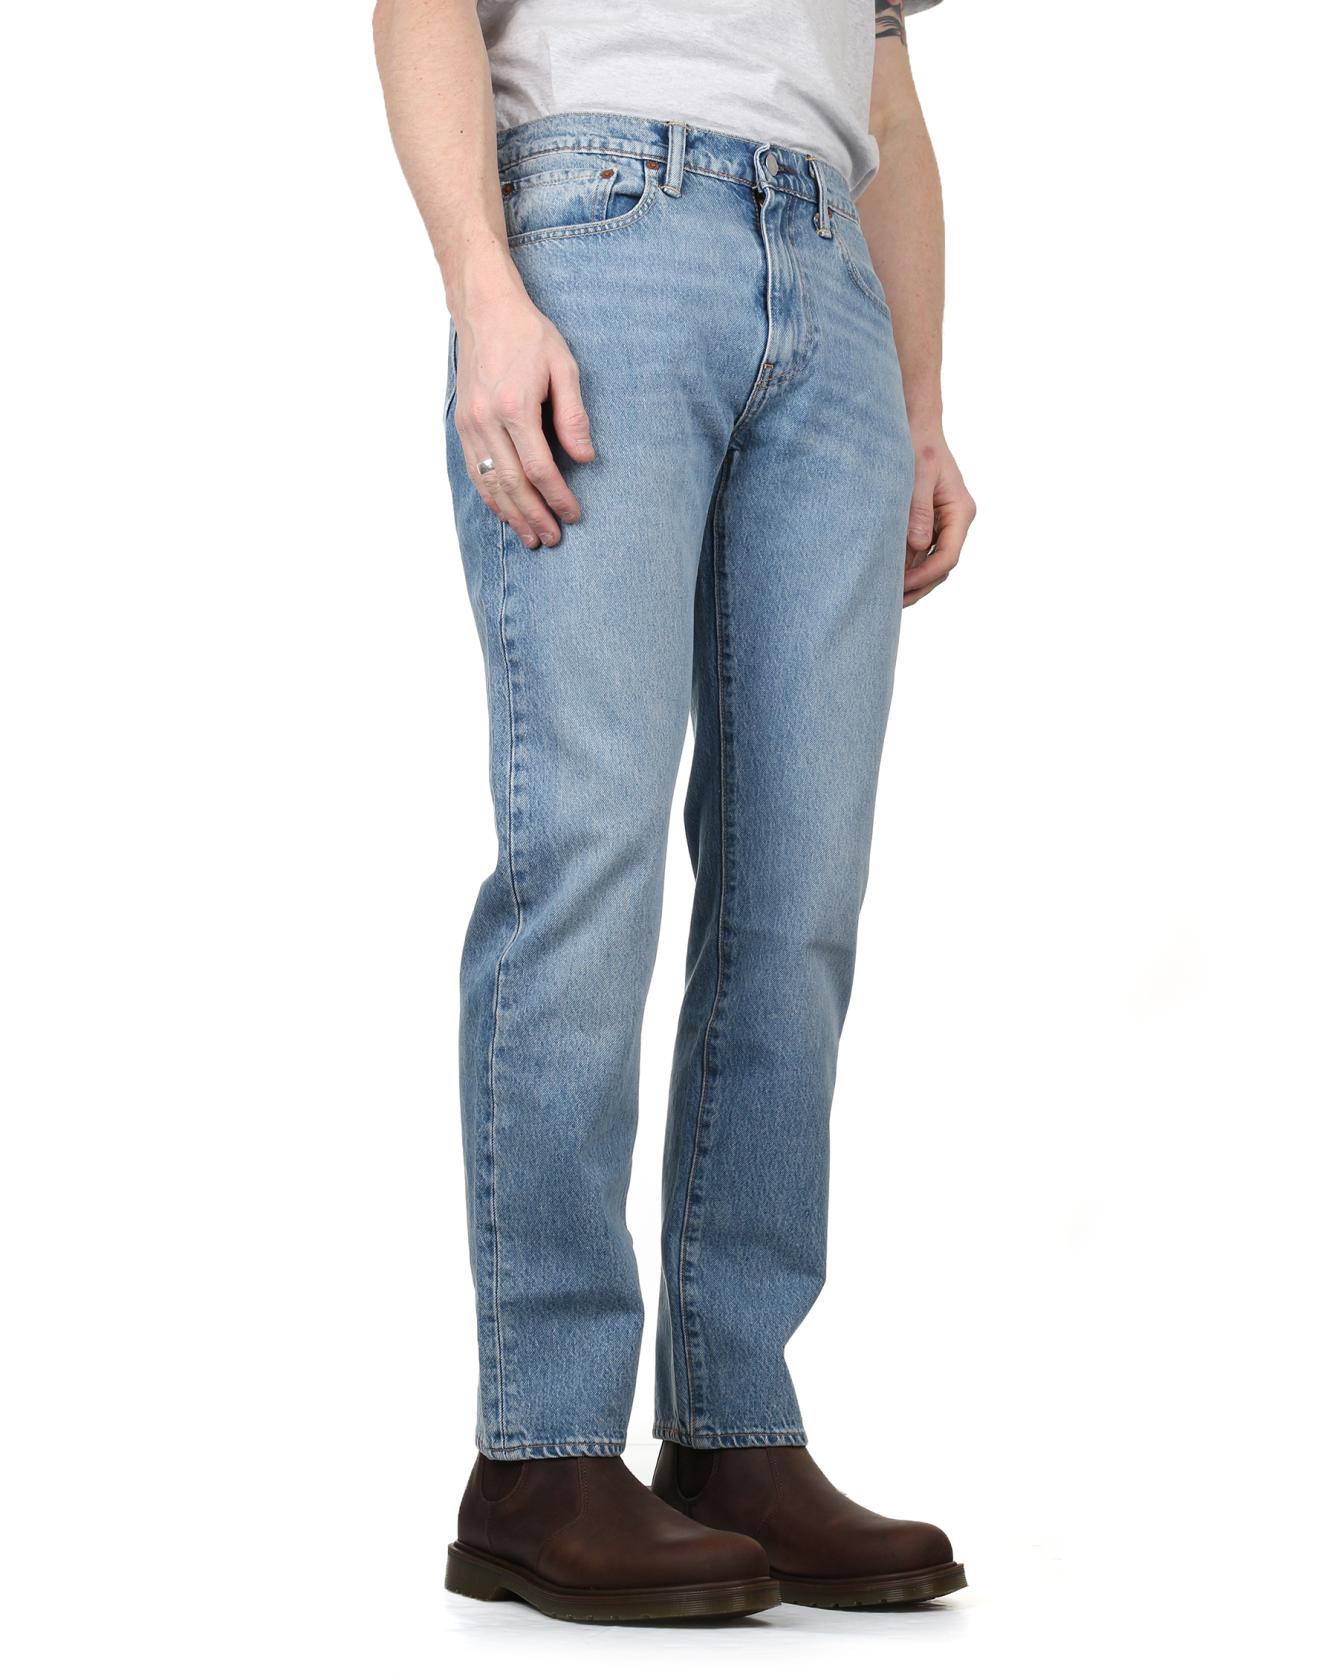 4 Levi's Jeans To Wear This Summer For Men - THE JEANS BLOG